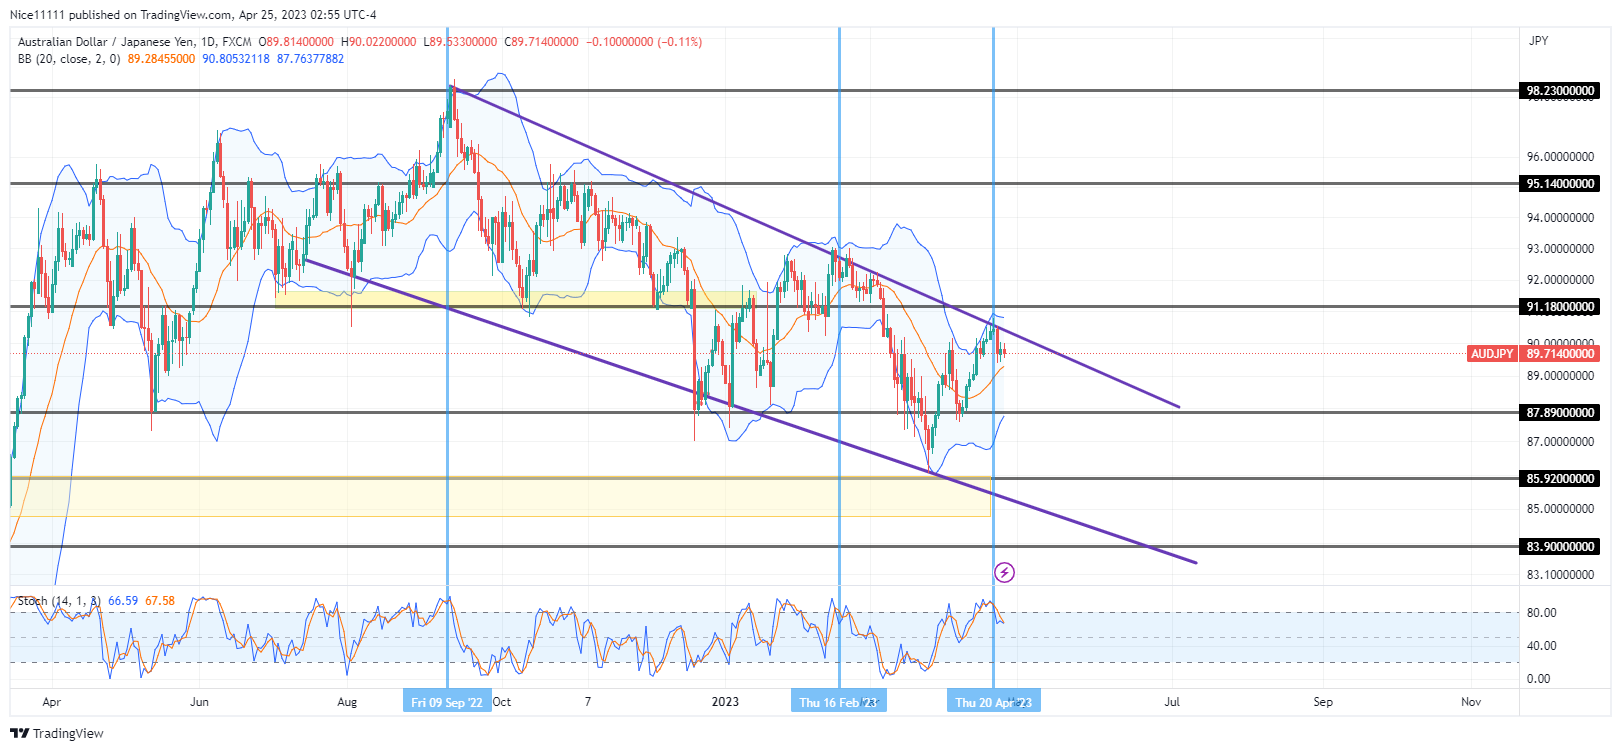 AUDJPY Ascends Into the Confluence Region